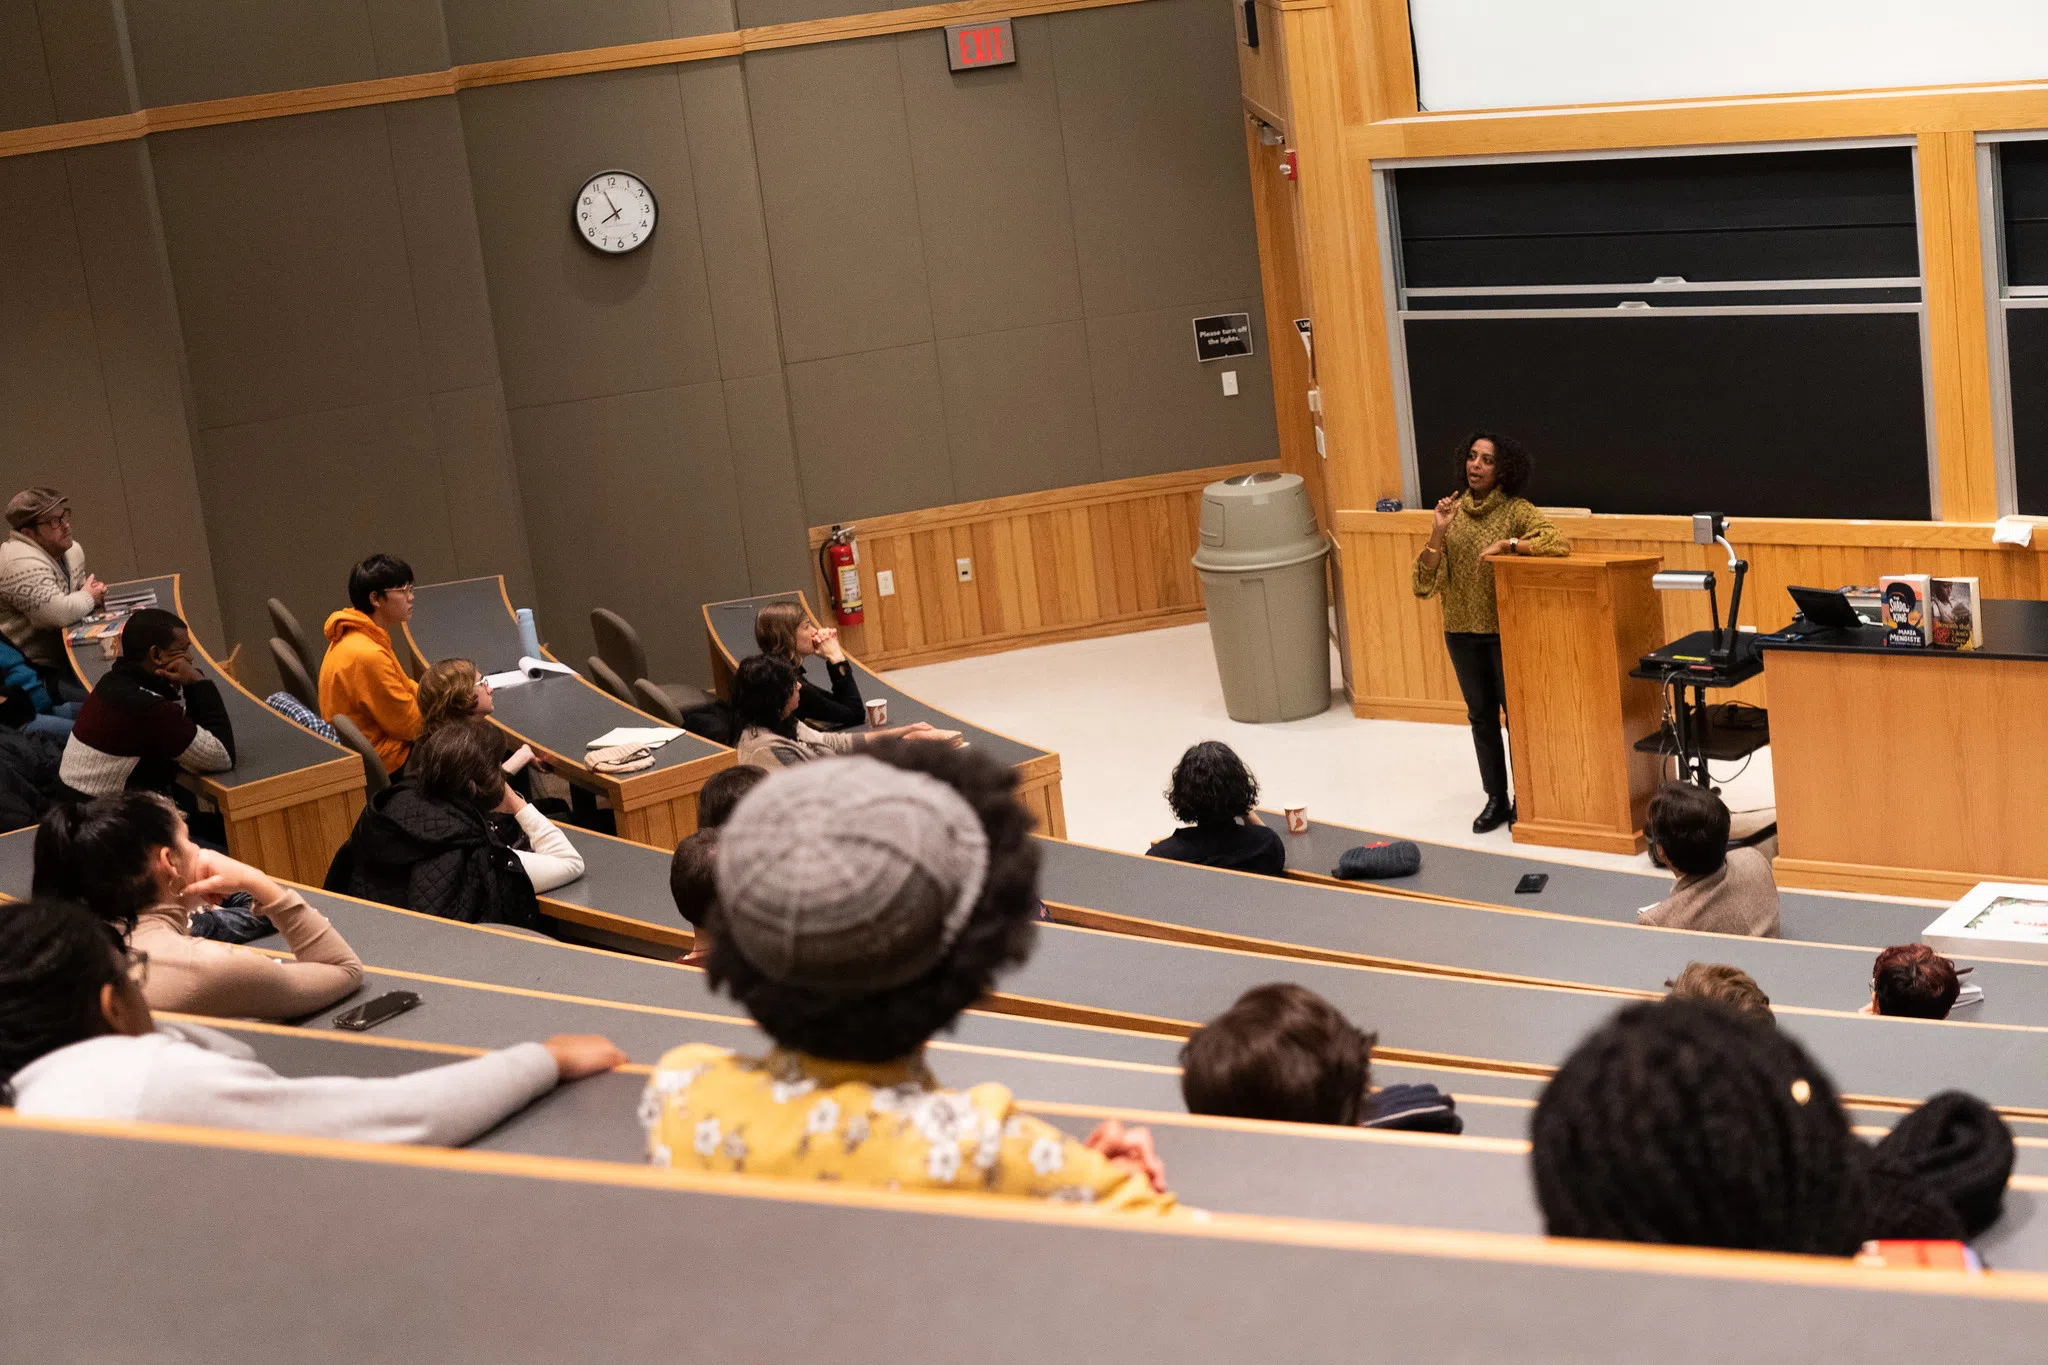 Students sit for a science lecture.